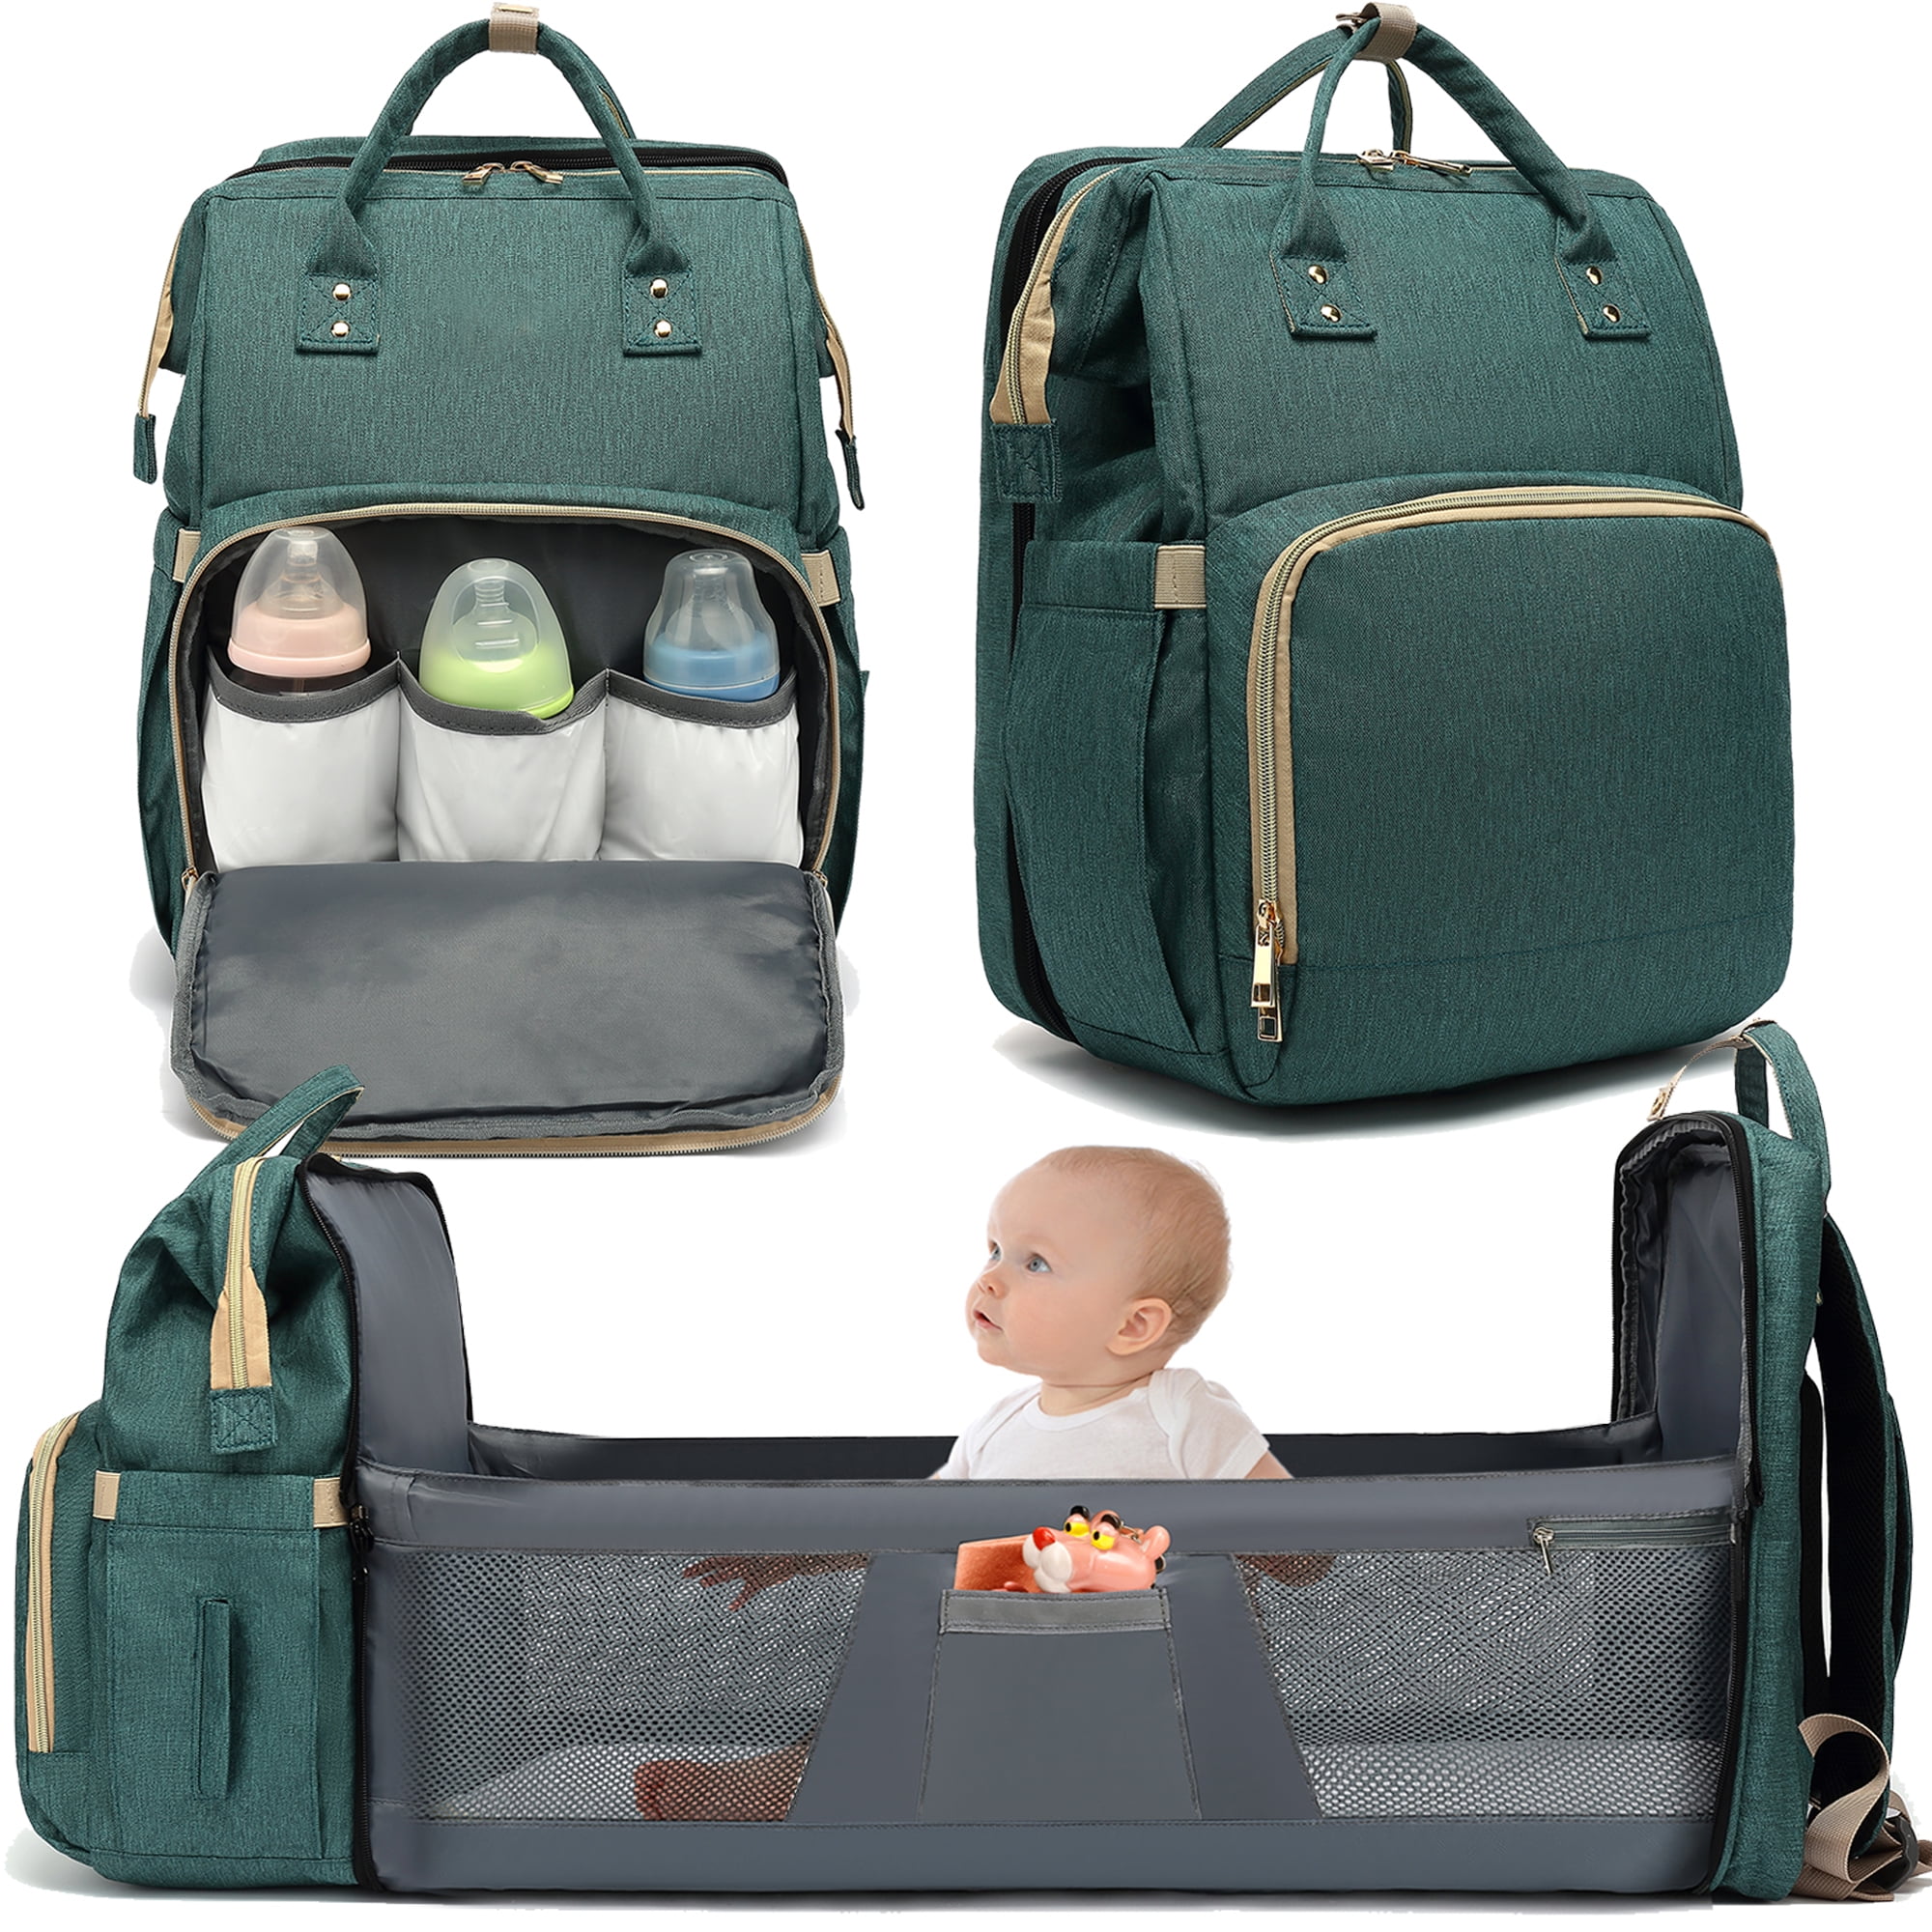 Loreto in B Baby Magazine's Top 10 changing bags | PacaPod